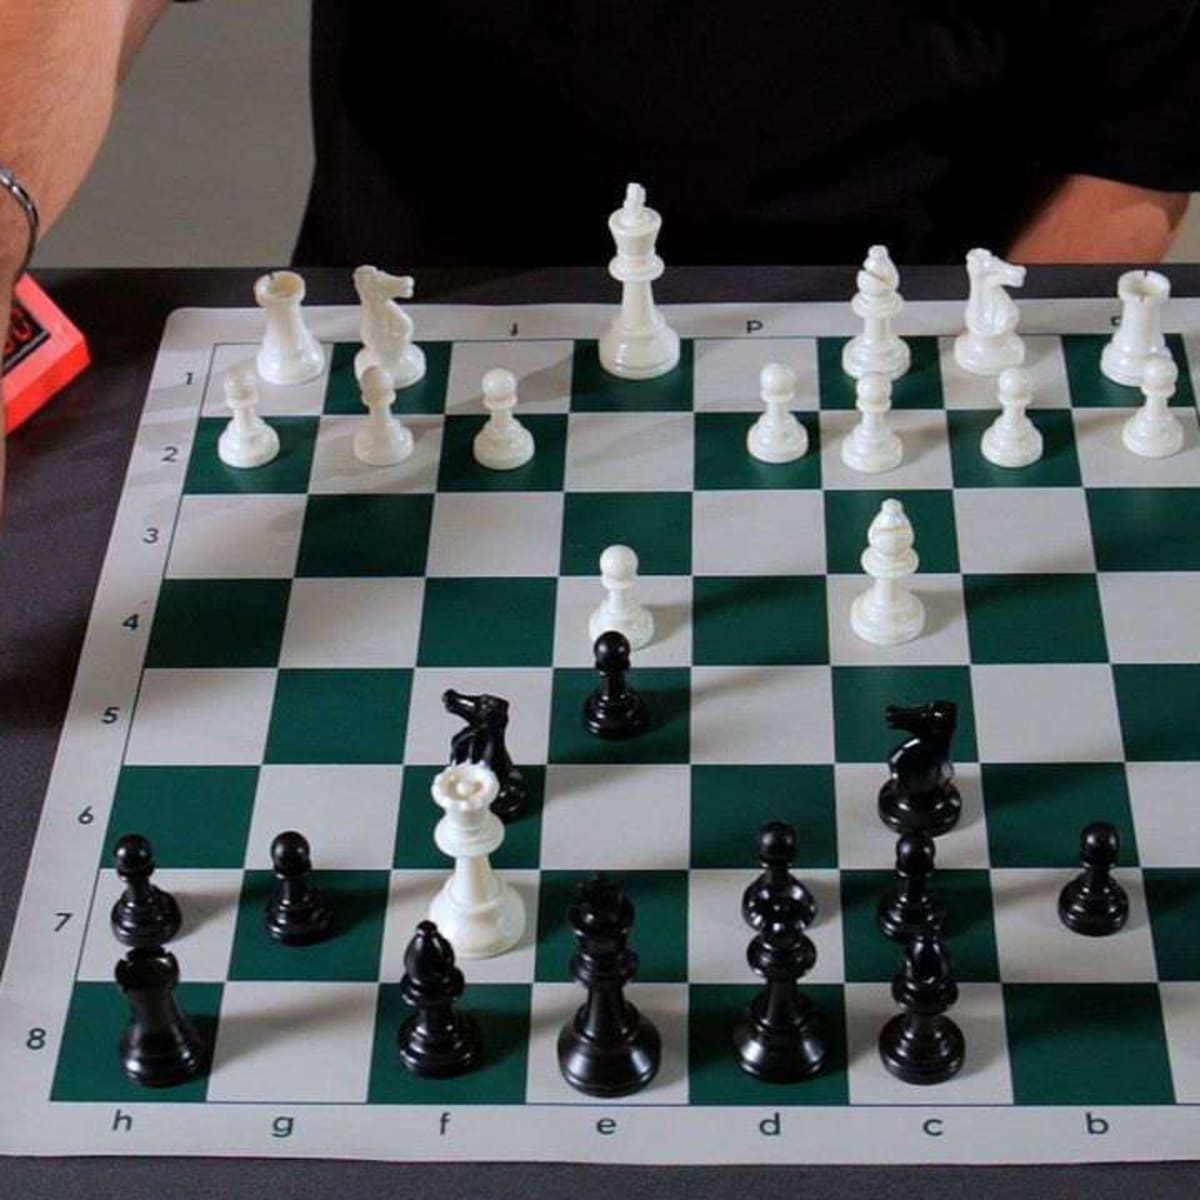 Grow In Chess Academy - Scholar's Mate (4-Move Checkmate) The four